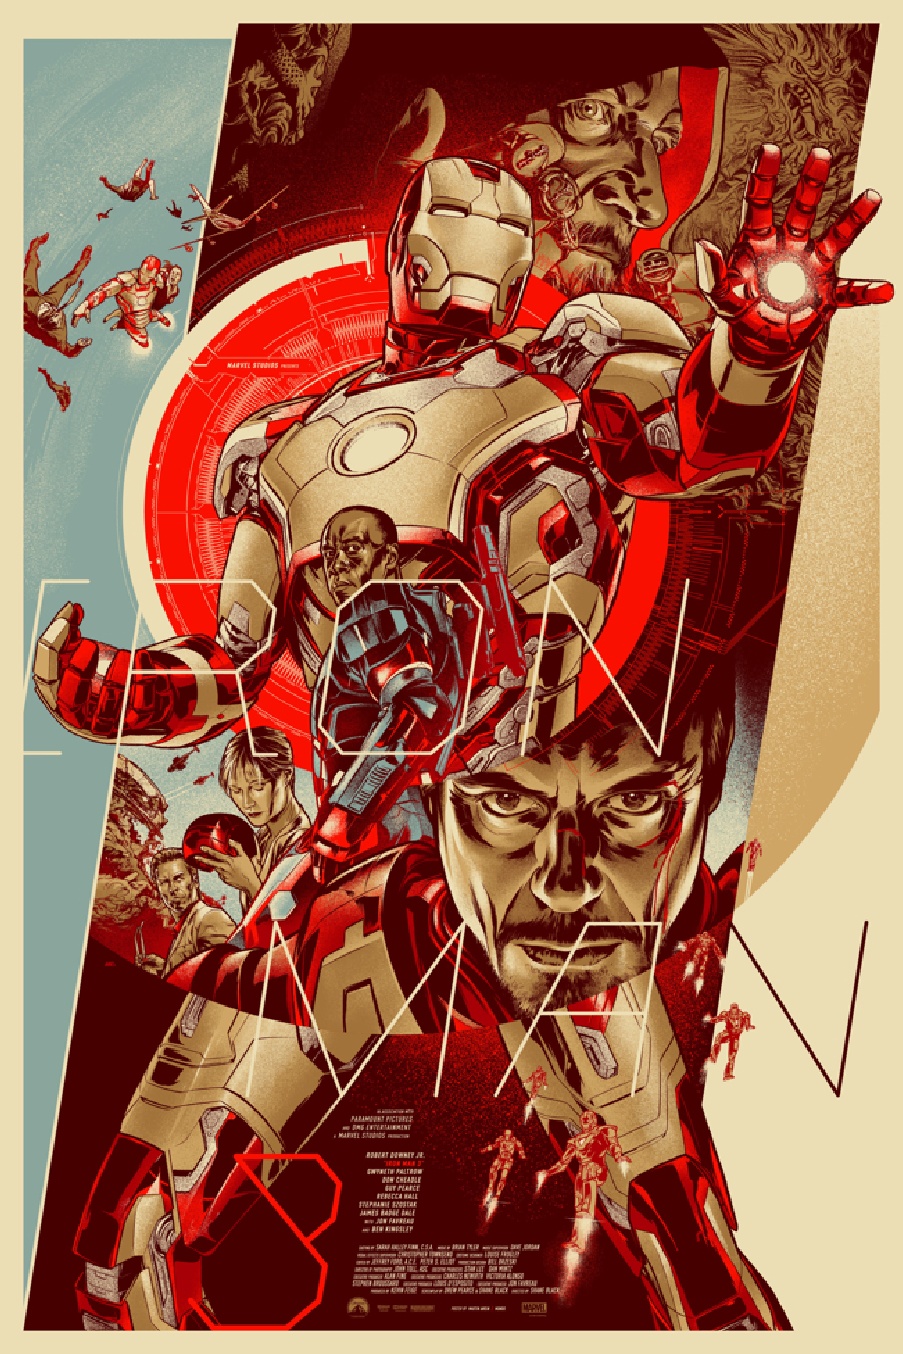 INSIDE THE ROCK POSTER FRAME BLOG Iron Man 3 Posters by